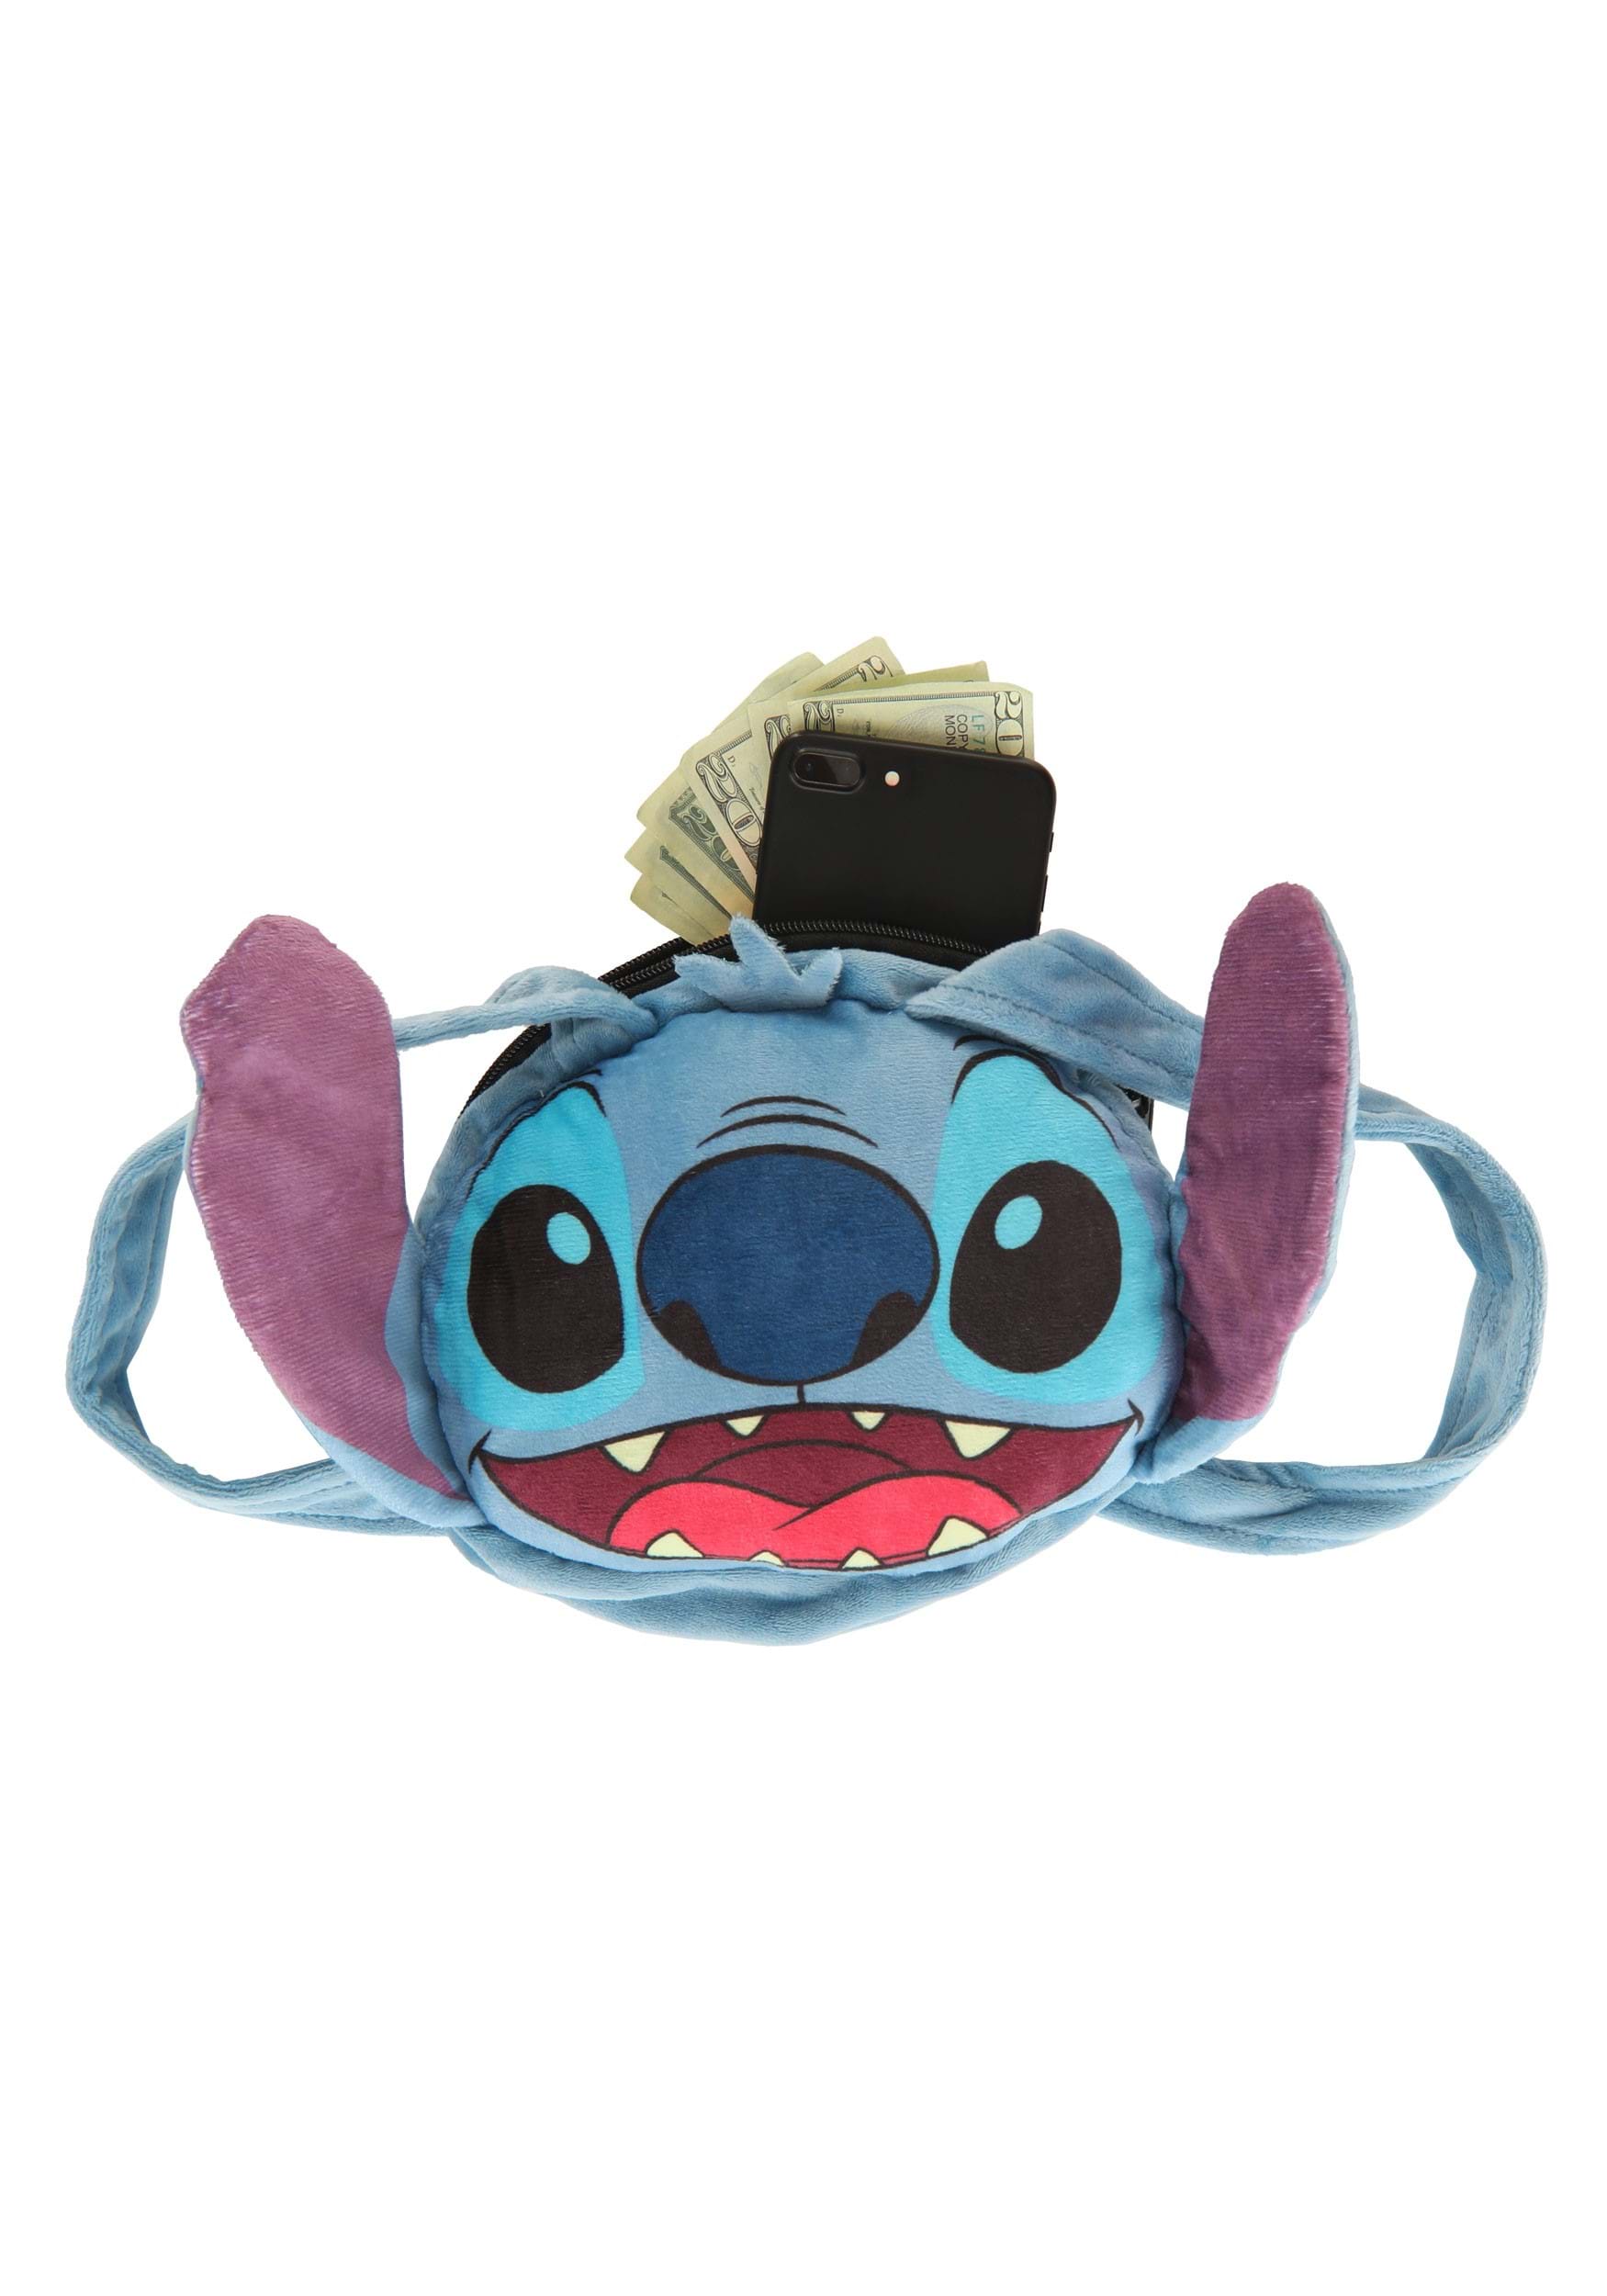 Disney Lilo Stitch Large 18 Soft Plush Backpack Licensed Stuffed Doll Toy  Gift